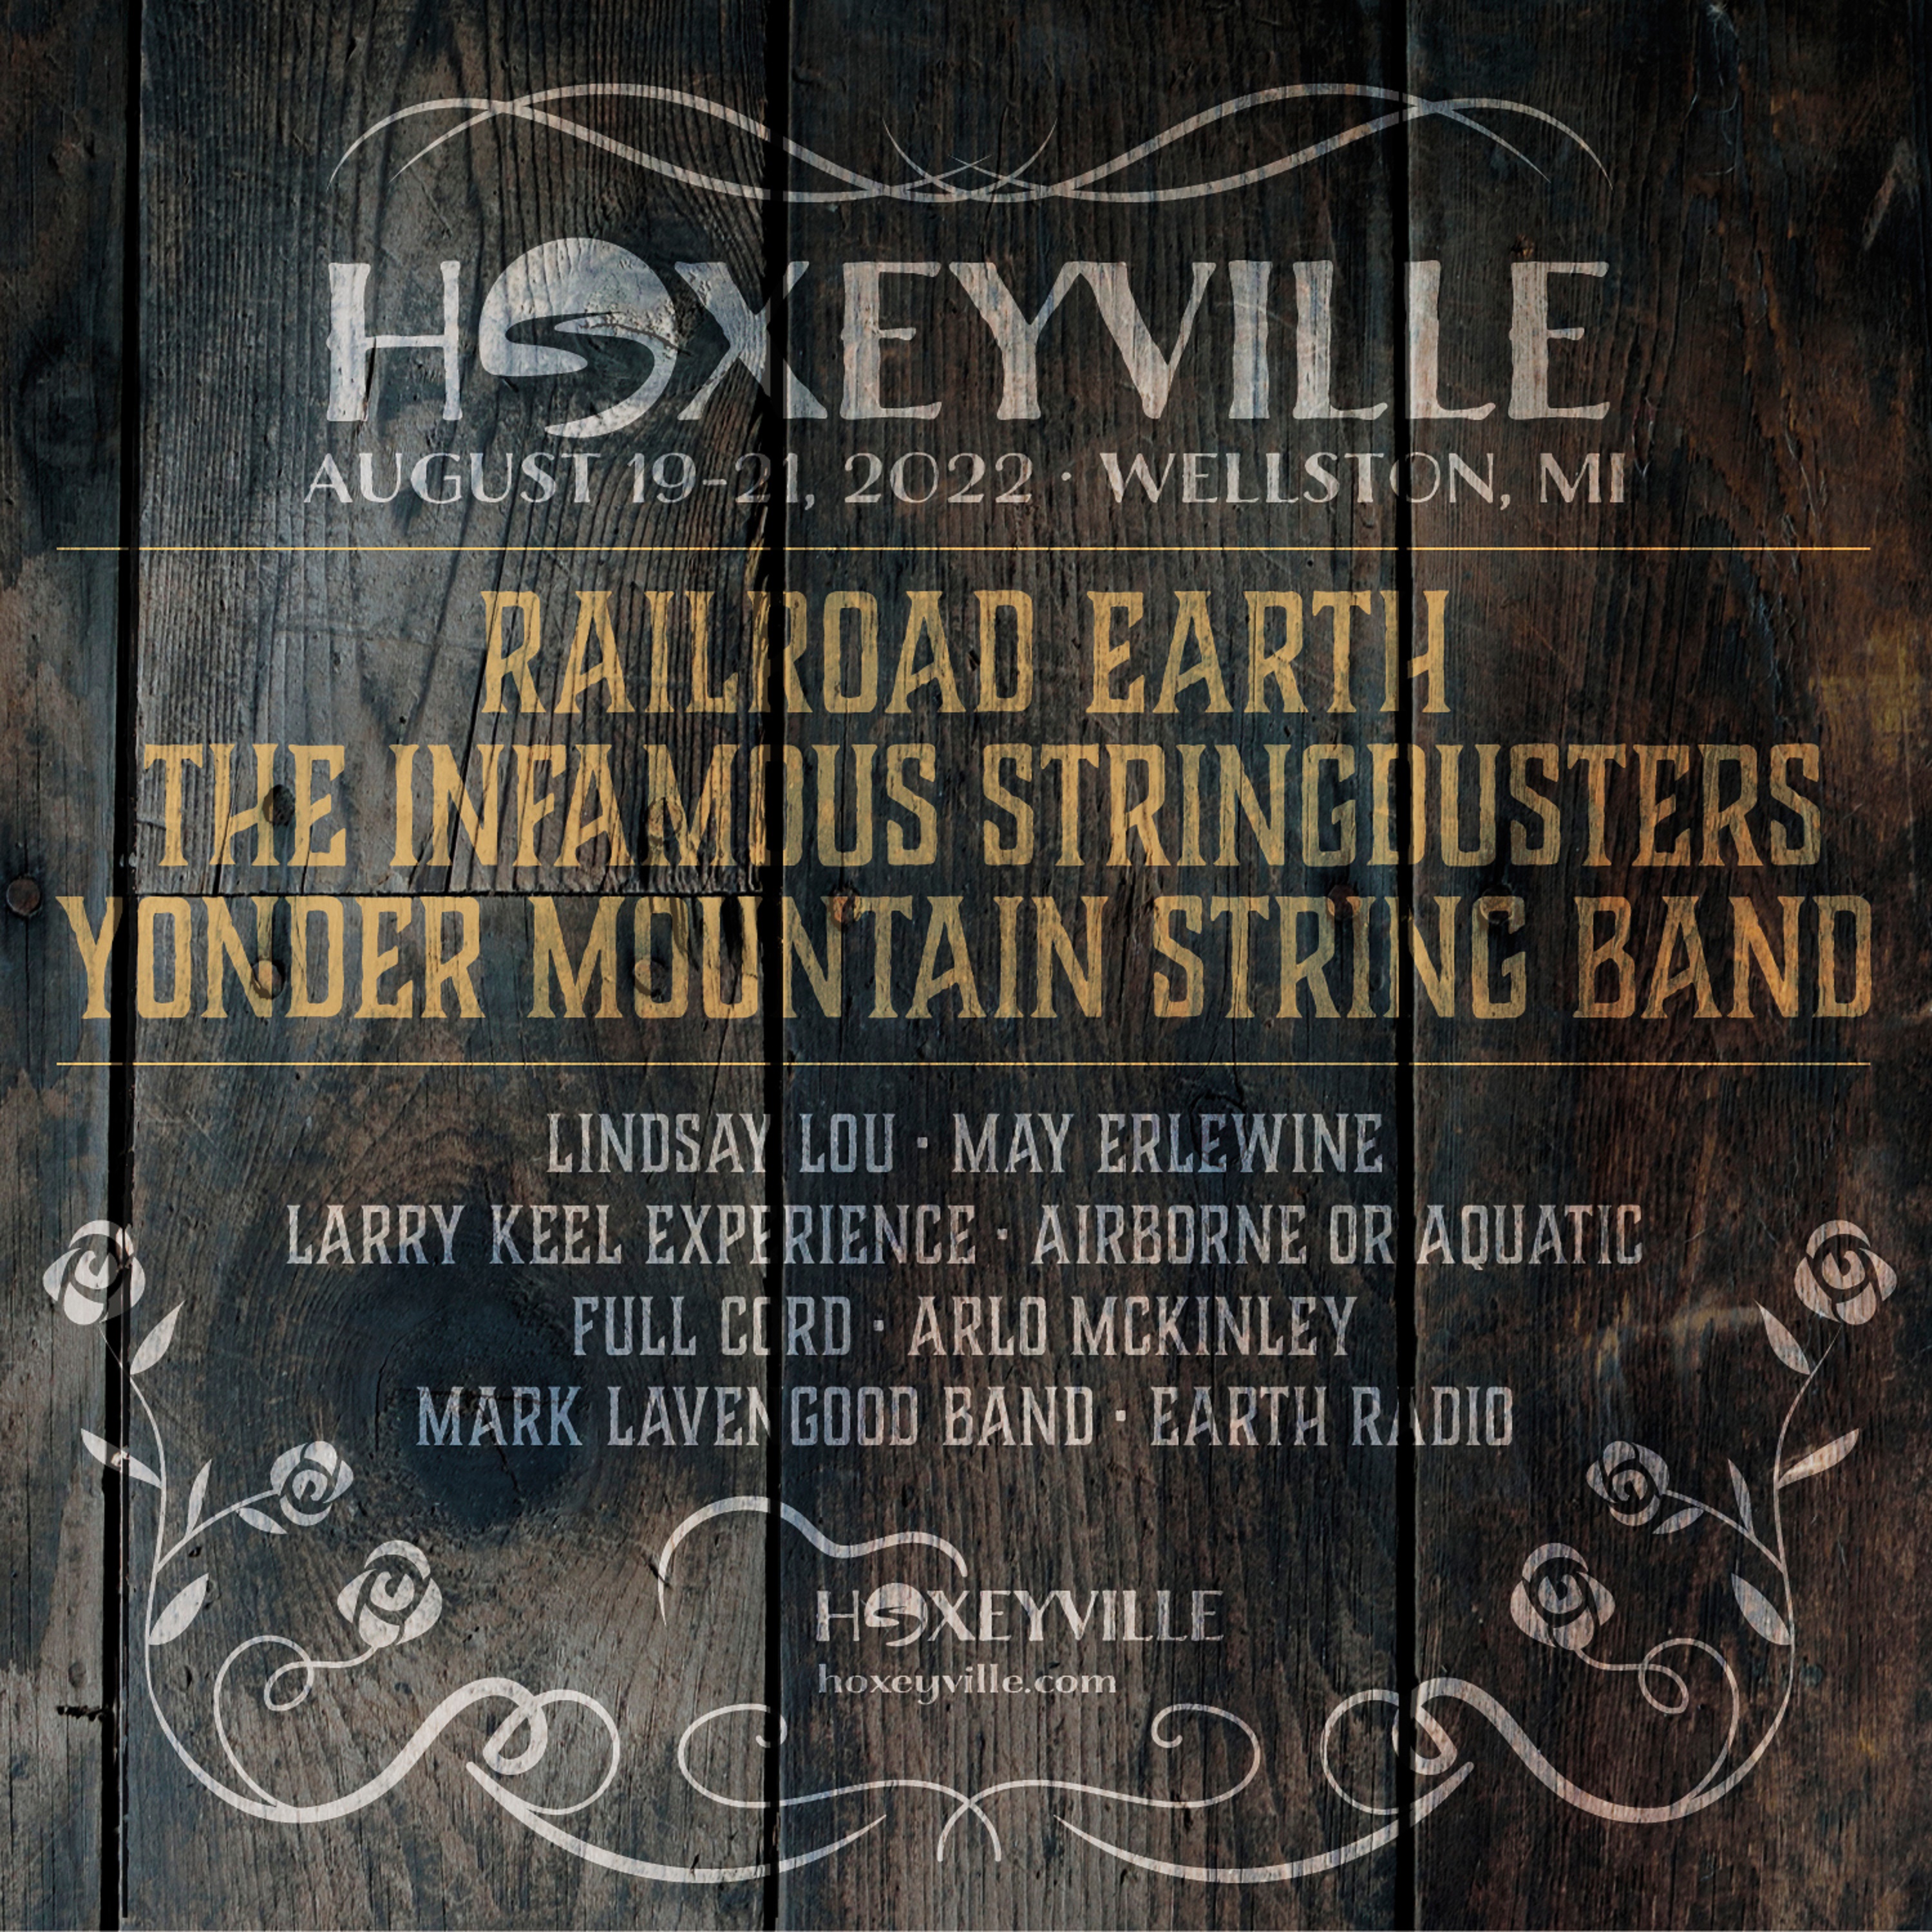 20 Years of Hoxeyville; 2022 Festival Lineup Anchored by Railroad Earth, The Infamous Stringdusters, Yonder Mountain String Band